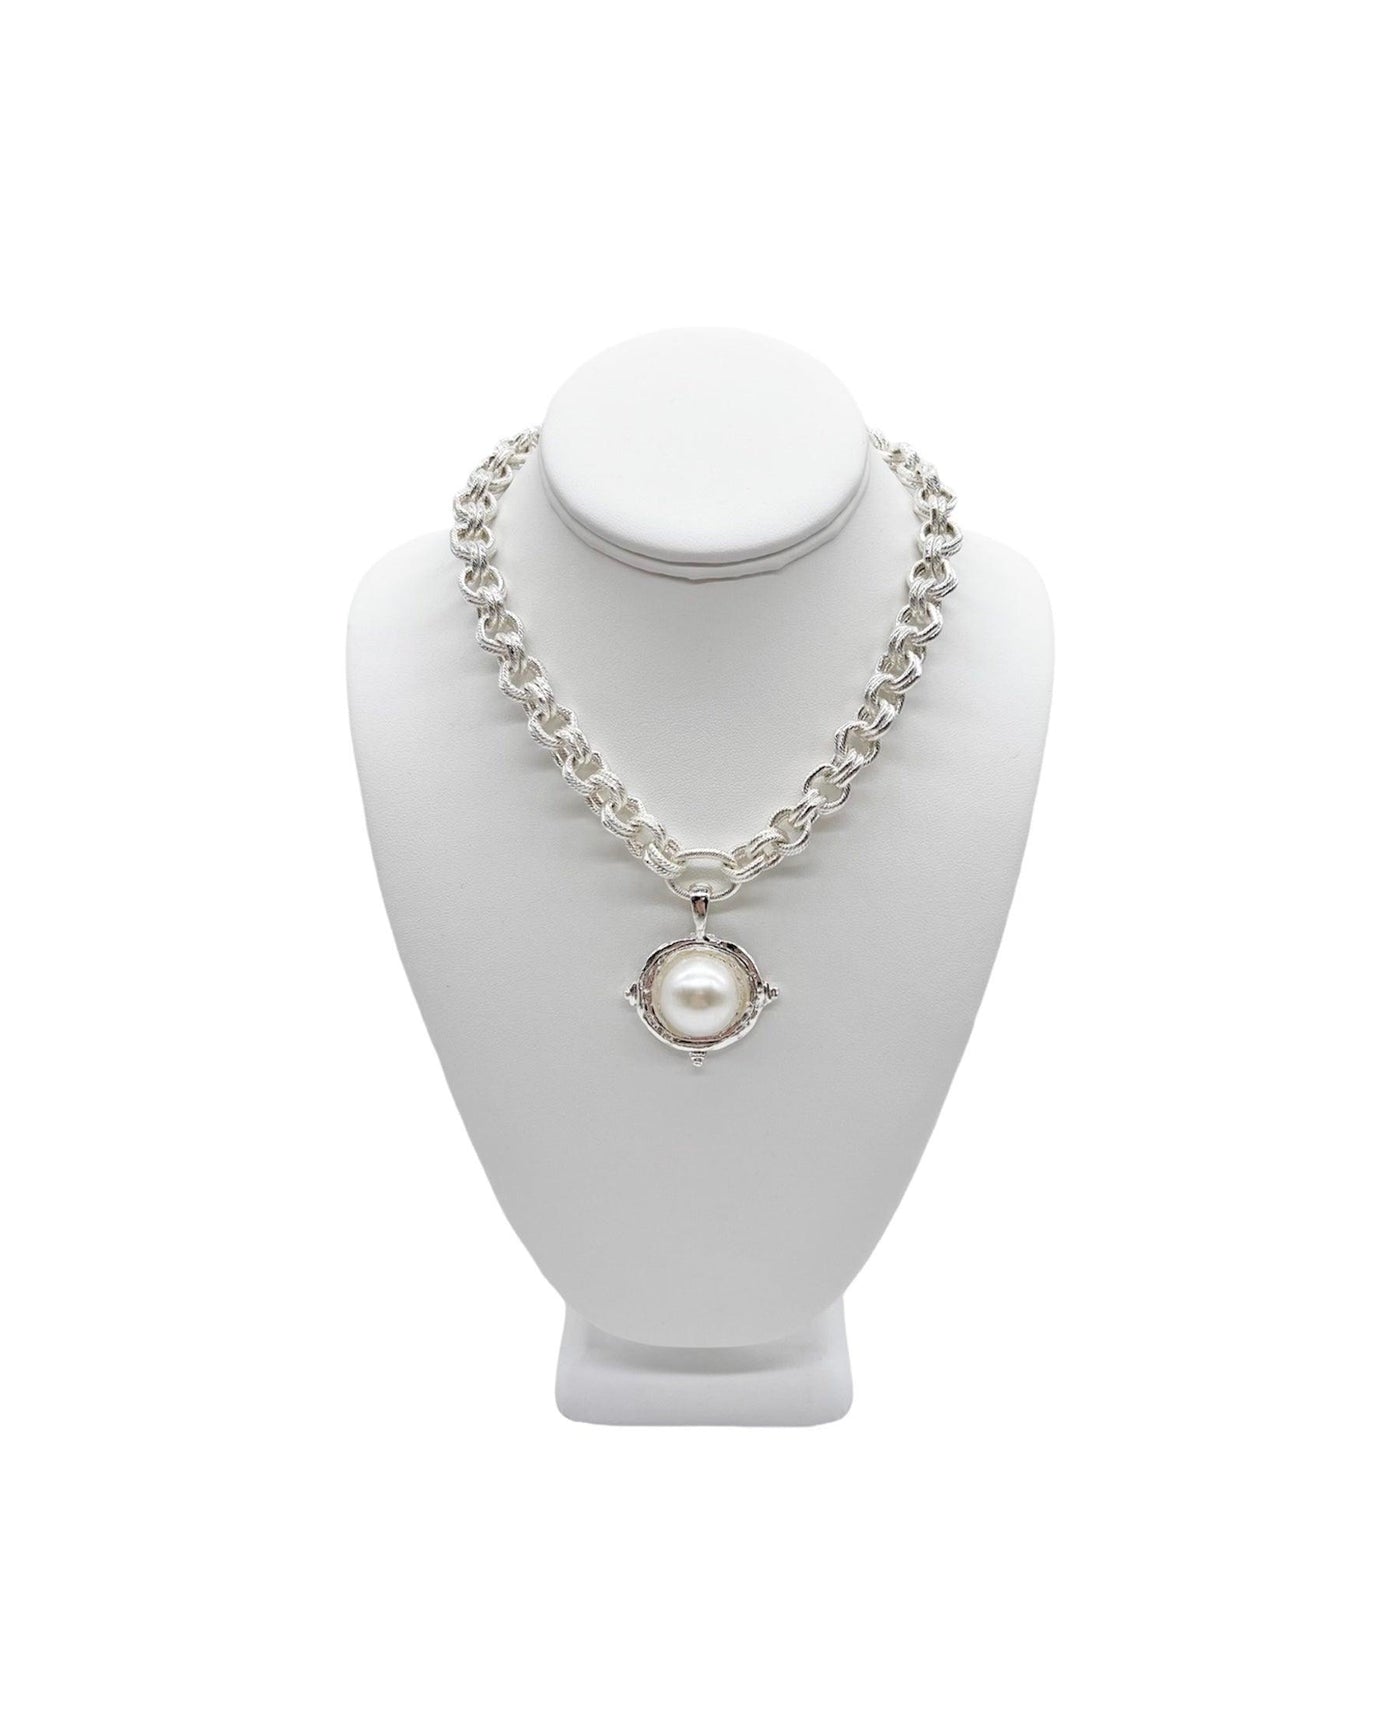 Double chainlink necklace with three studded silver drop pendant and accent pearl on a white display neck